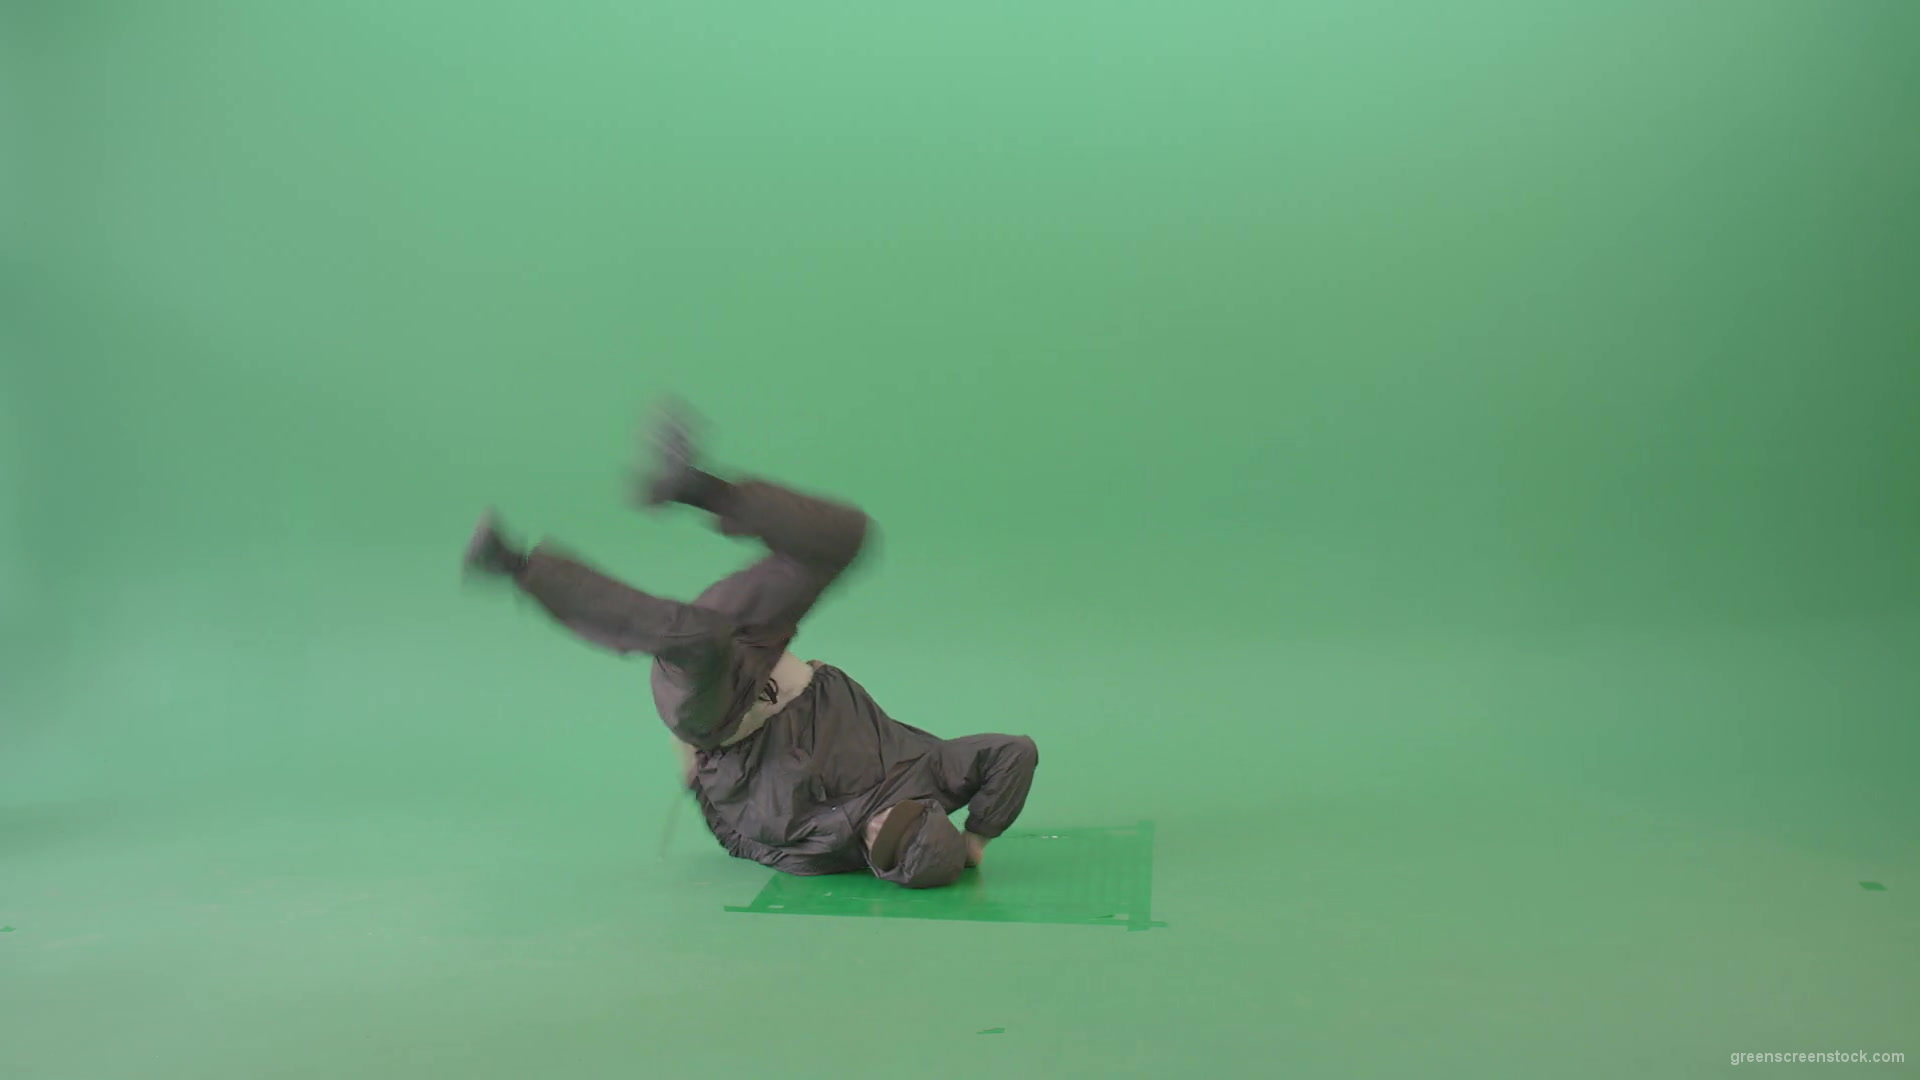 Hip-Hop-Dance-making-power-move-with-freeze-dancing-breakdance-on-green-screen-4K-Video-Footage-1920_008 Green Screen Stock